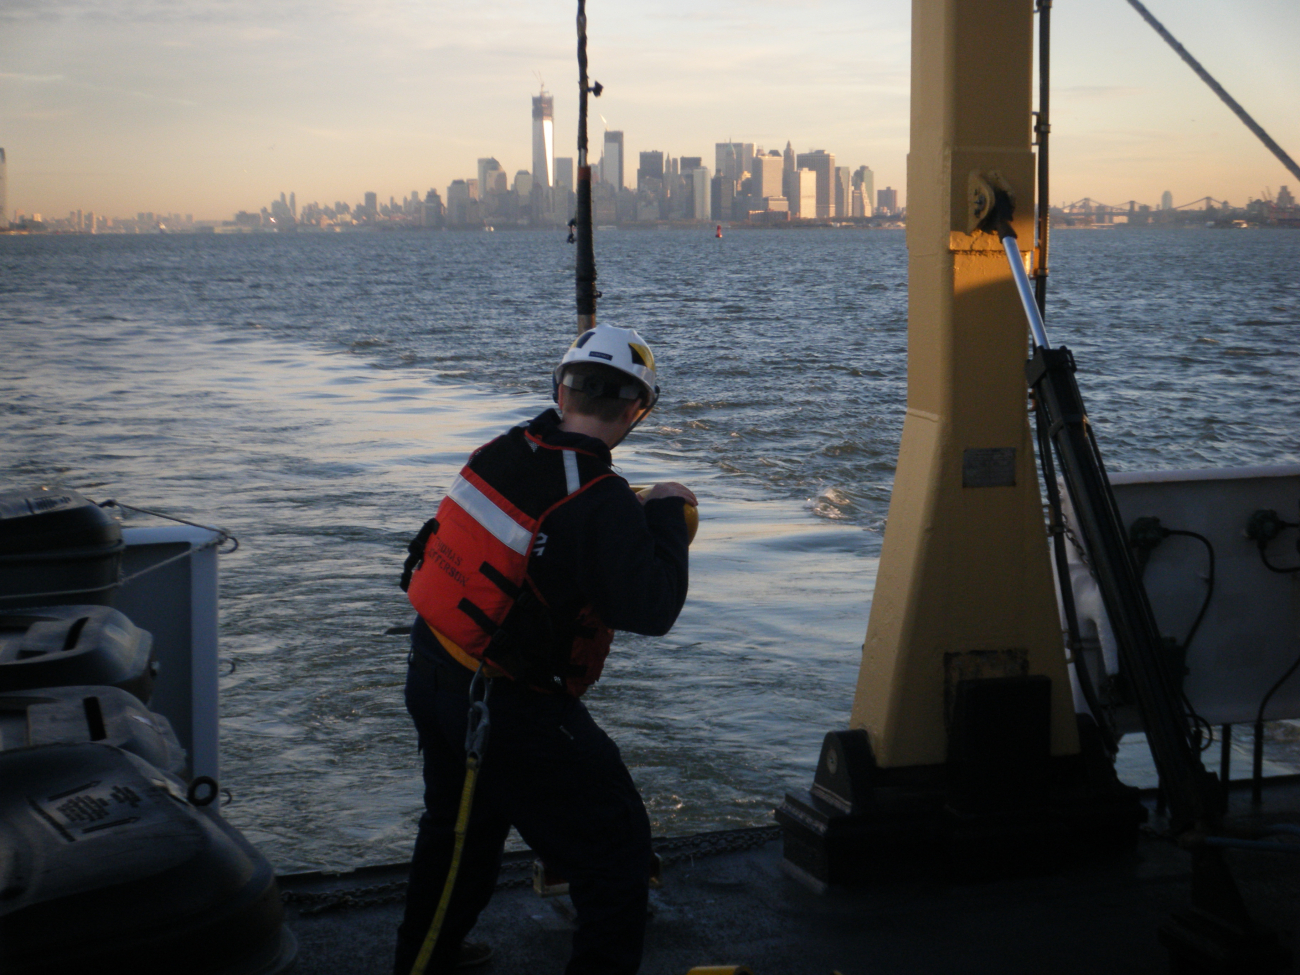 NOAA Corps Ensign Lindsey Norman retrieves a side scan sonar unit thatNOAA Ship THOMAS JEFFERSON used to survey the Hudson River on a post-Sandysurvey to allow fuel barge traffic to resume